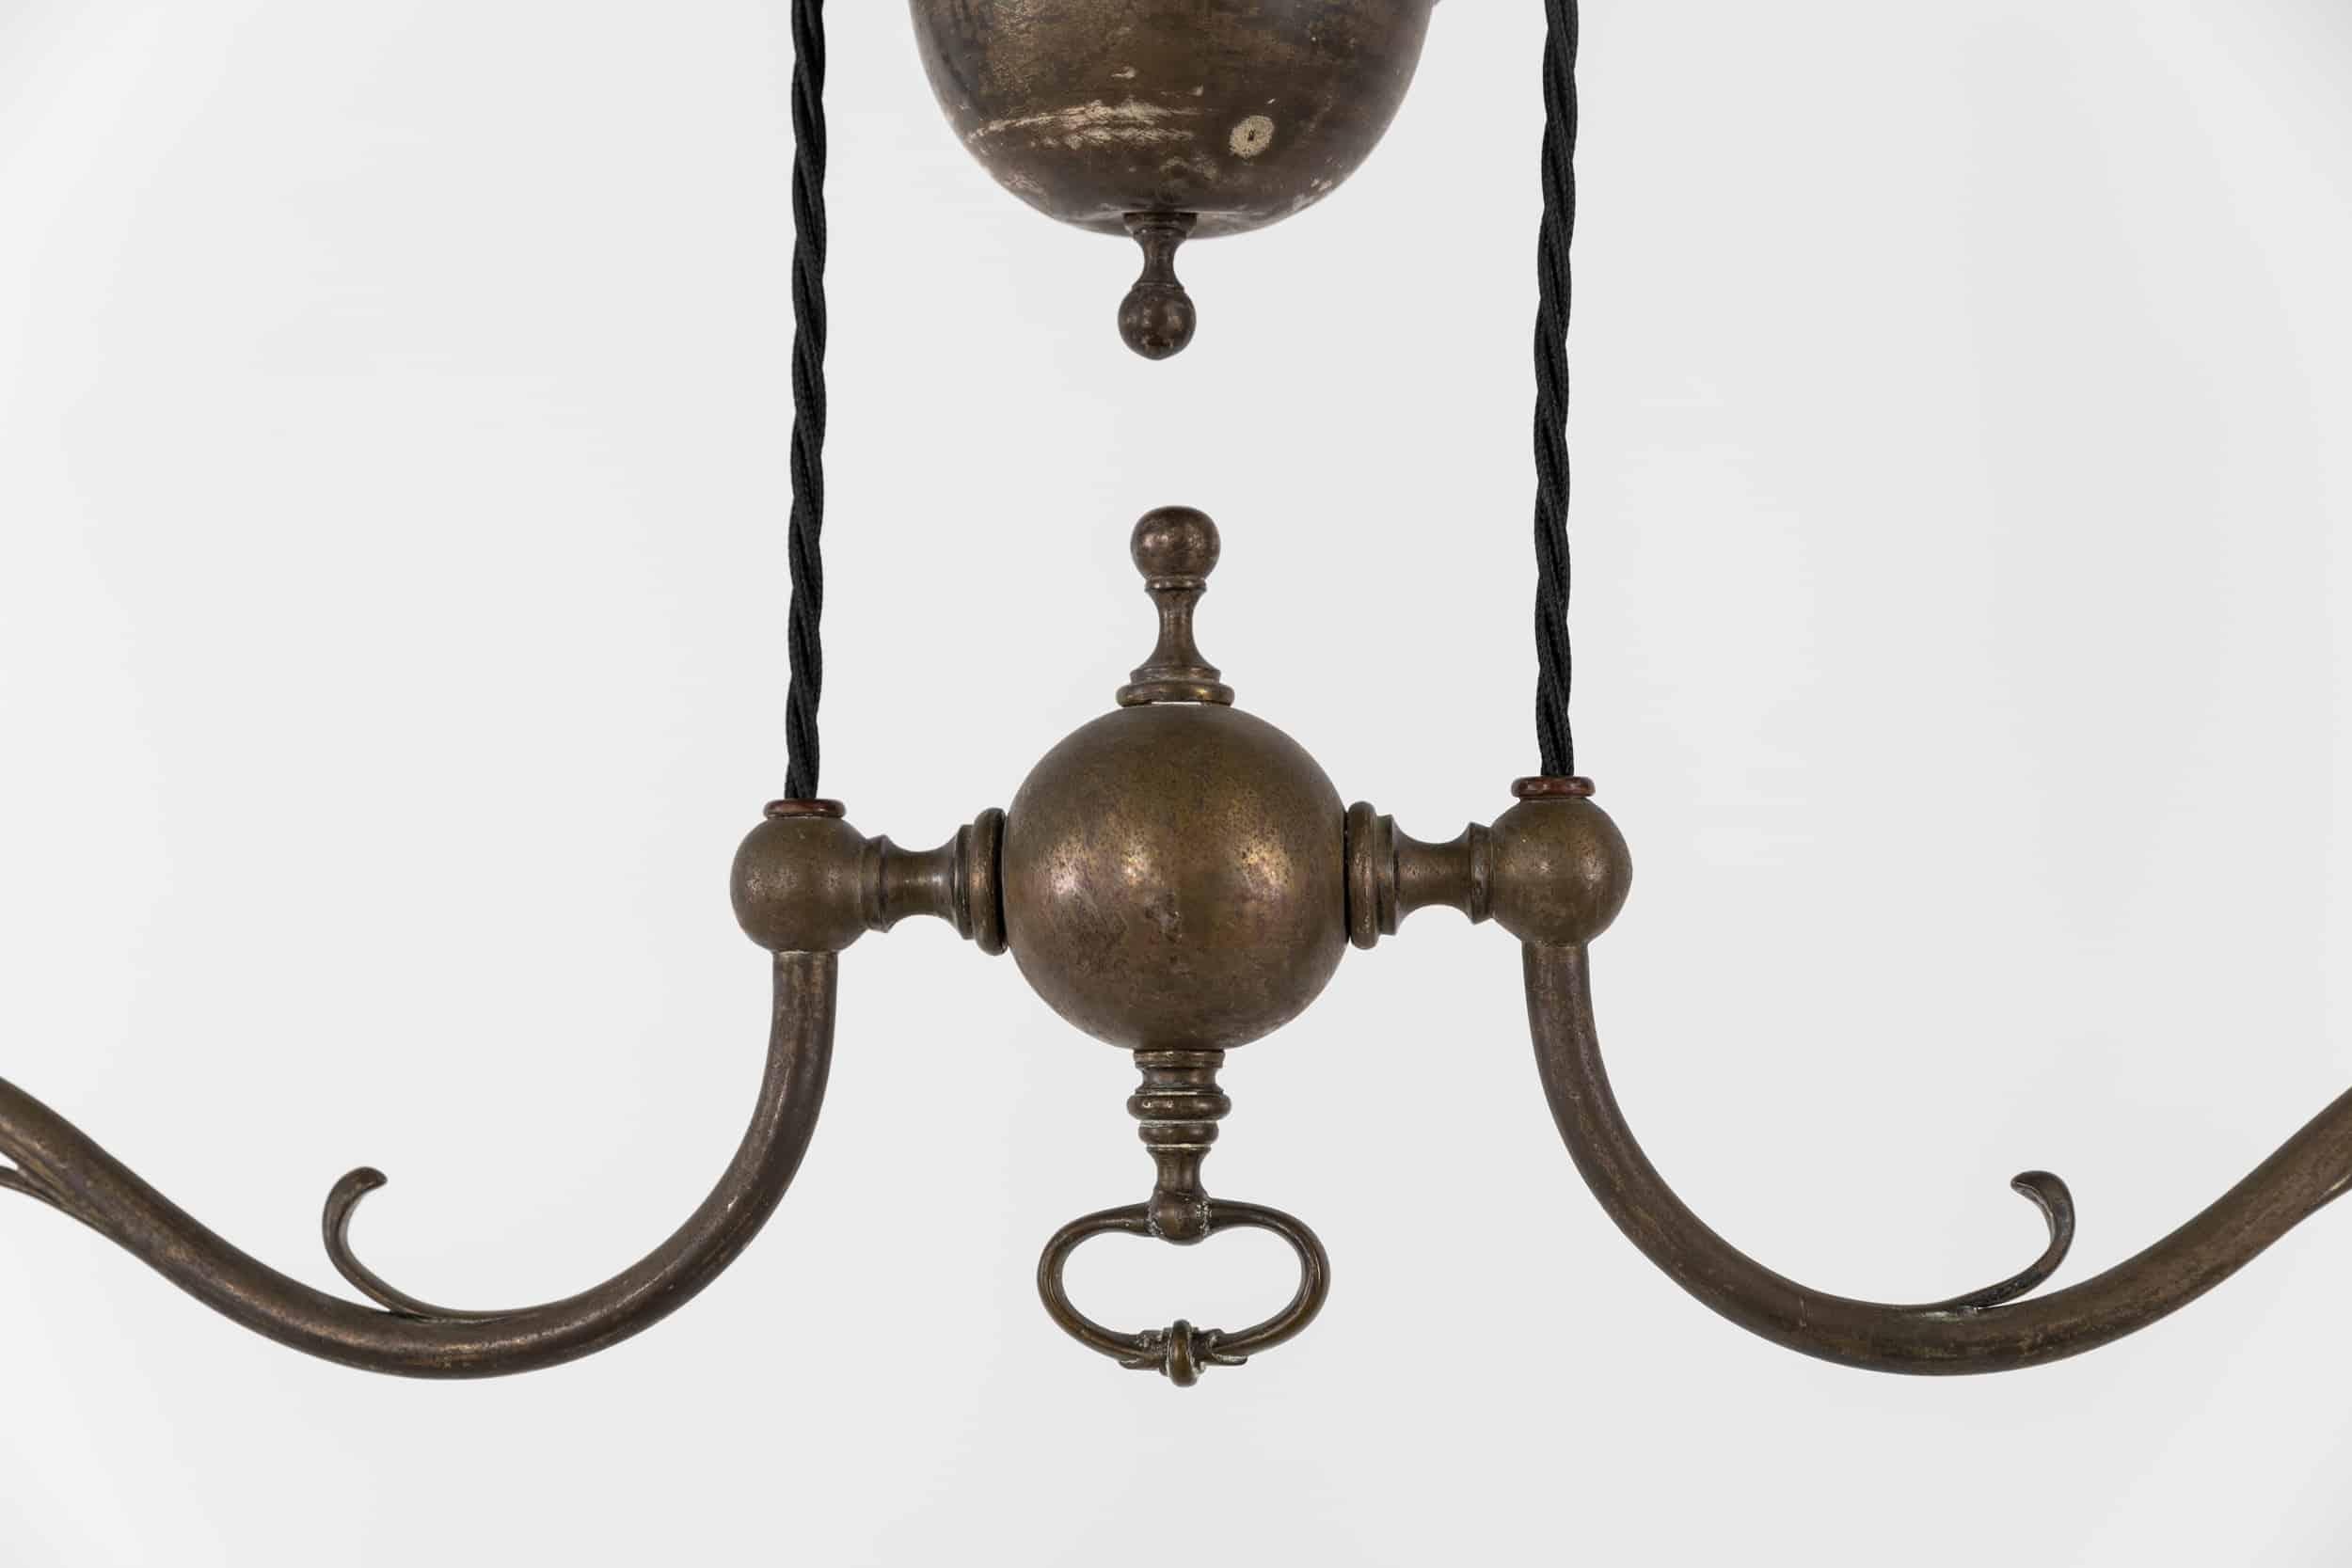 A beautifully formed rise and fall ceiling light with prismatic glass shades. c.1910

Nicely patinated brass with Holophane style prismatic glass lamp shades. Super elegant and very versatile, with approx 1m of height adjustment

Rewired with black